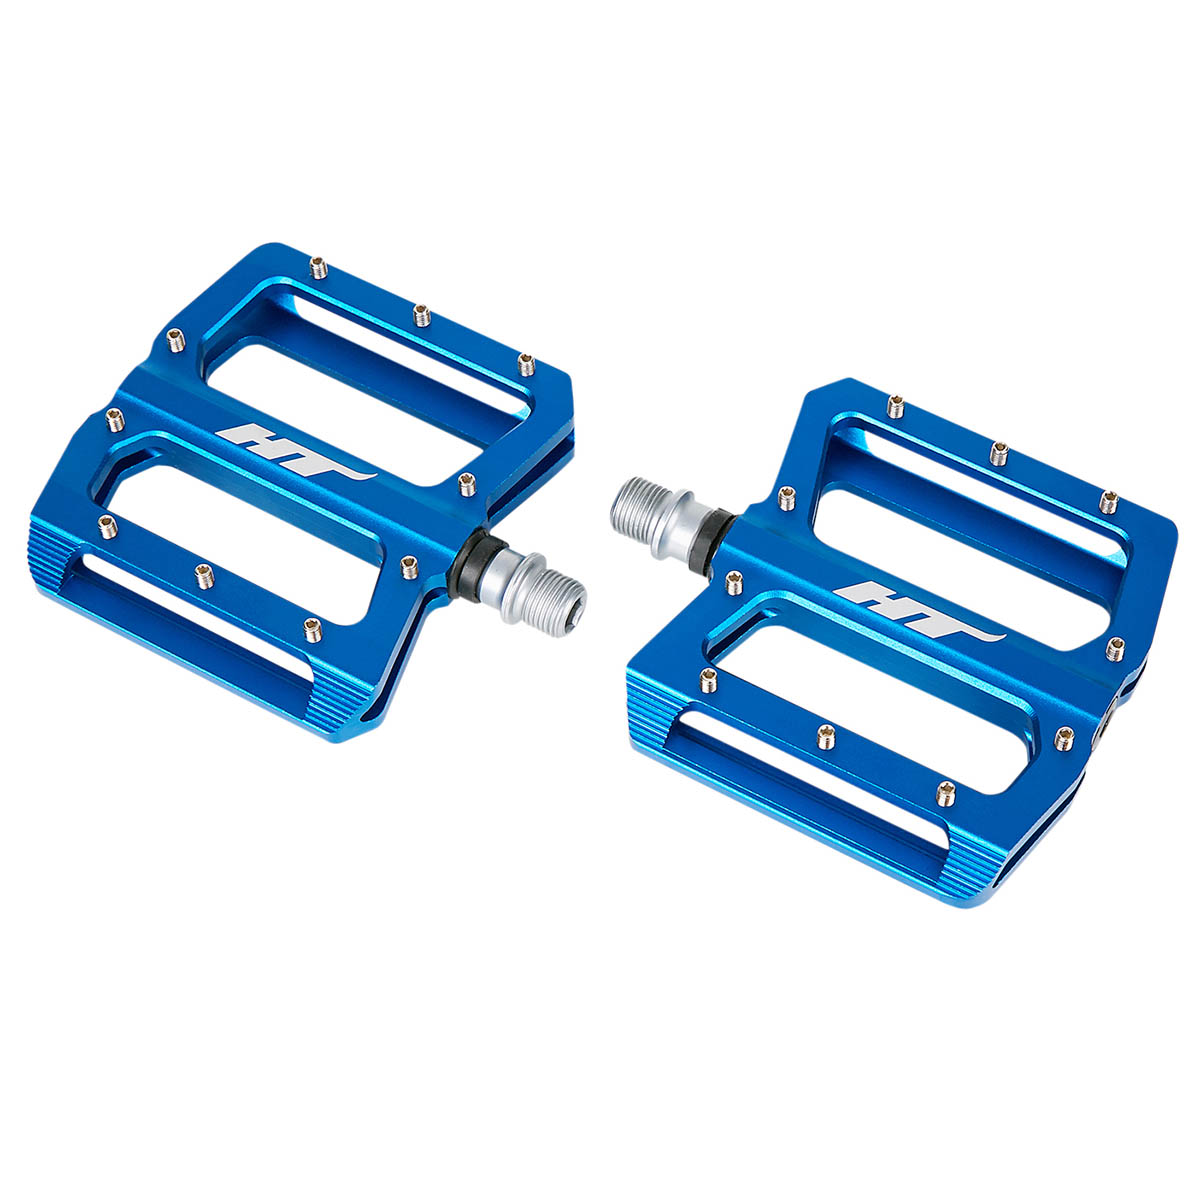 HT Components Pedals AN01 Marine Blue